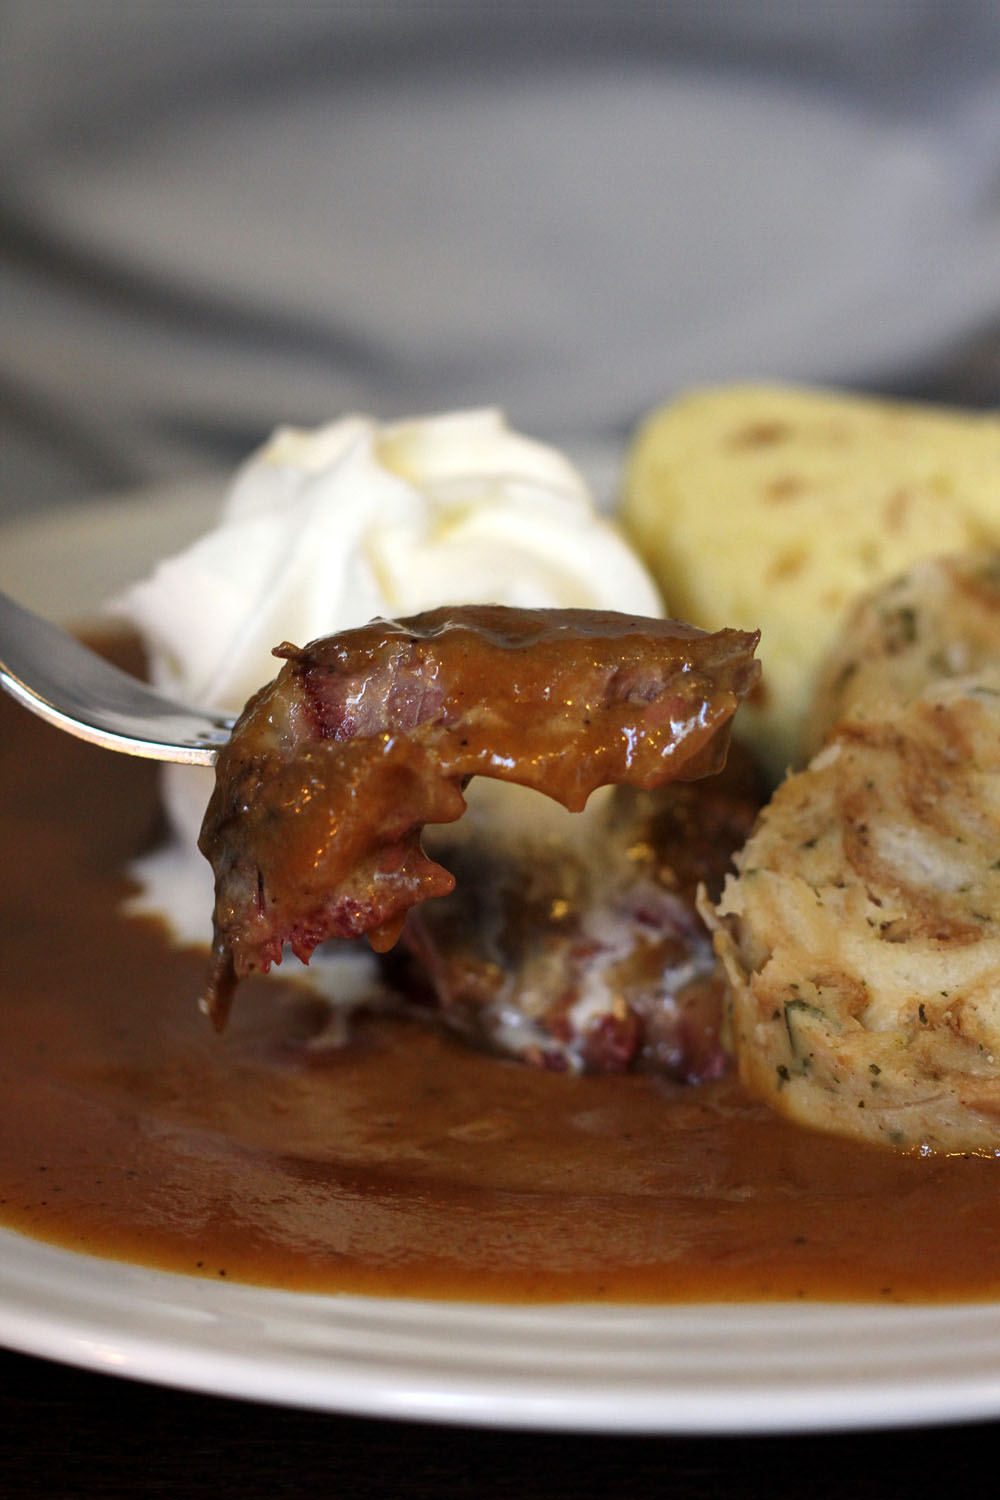 Larded beef in creamy sauce: braised and served with bread and Karlovy Vary dumplings, cranberries, lemon and cream